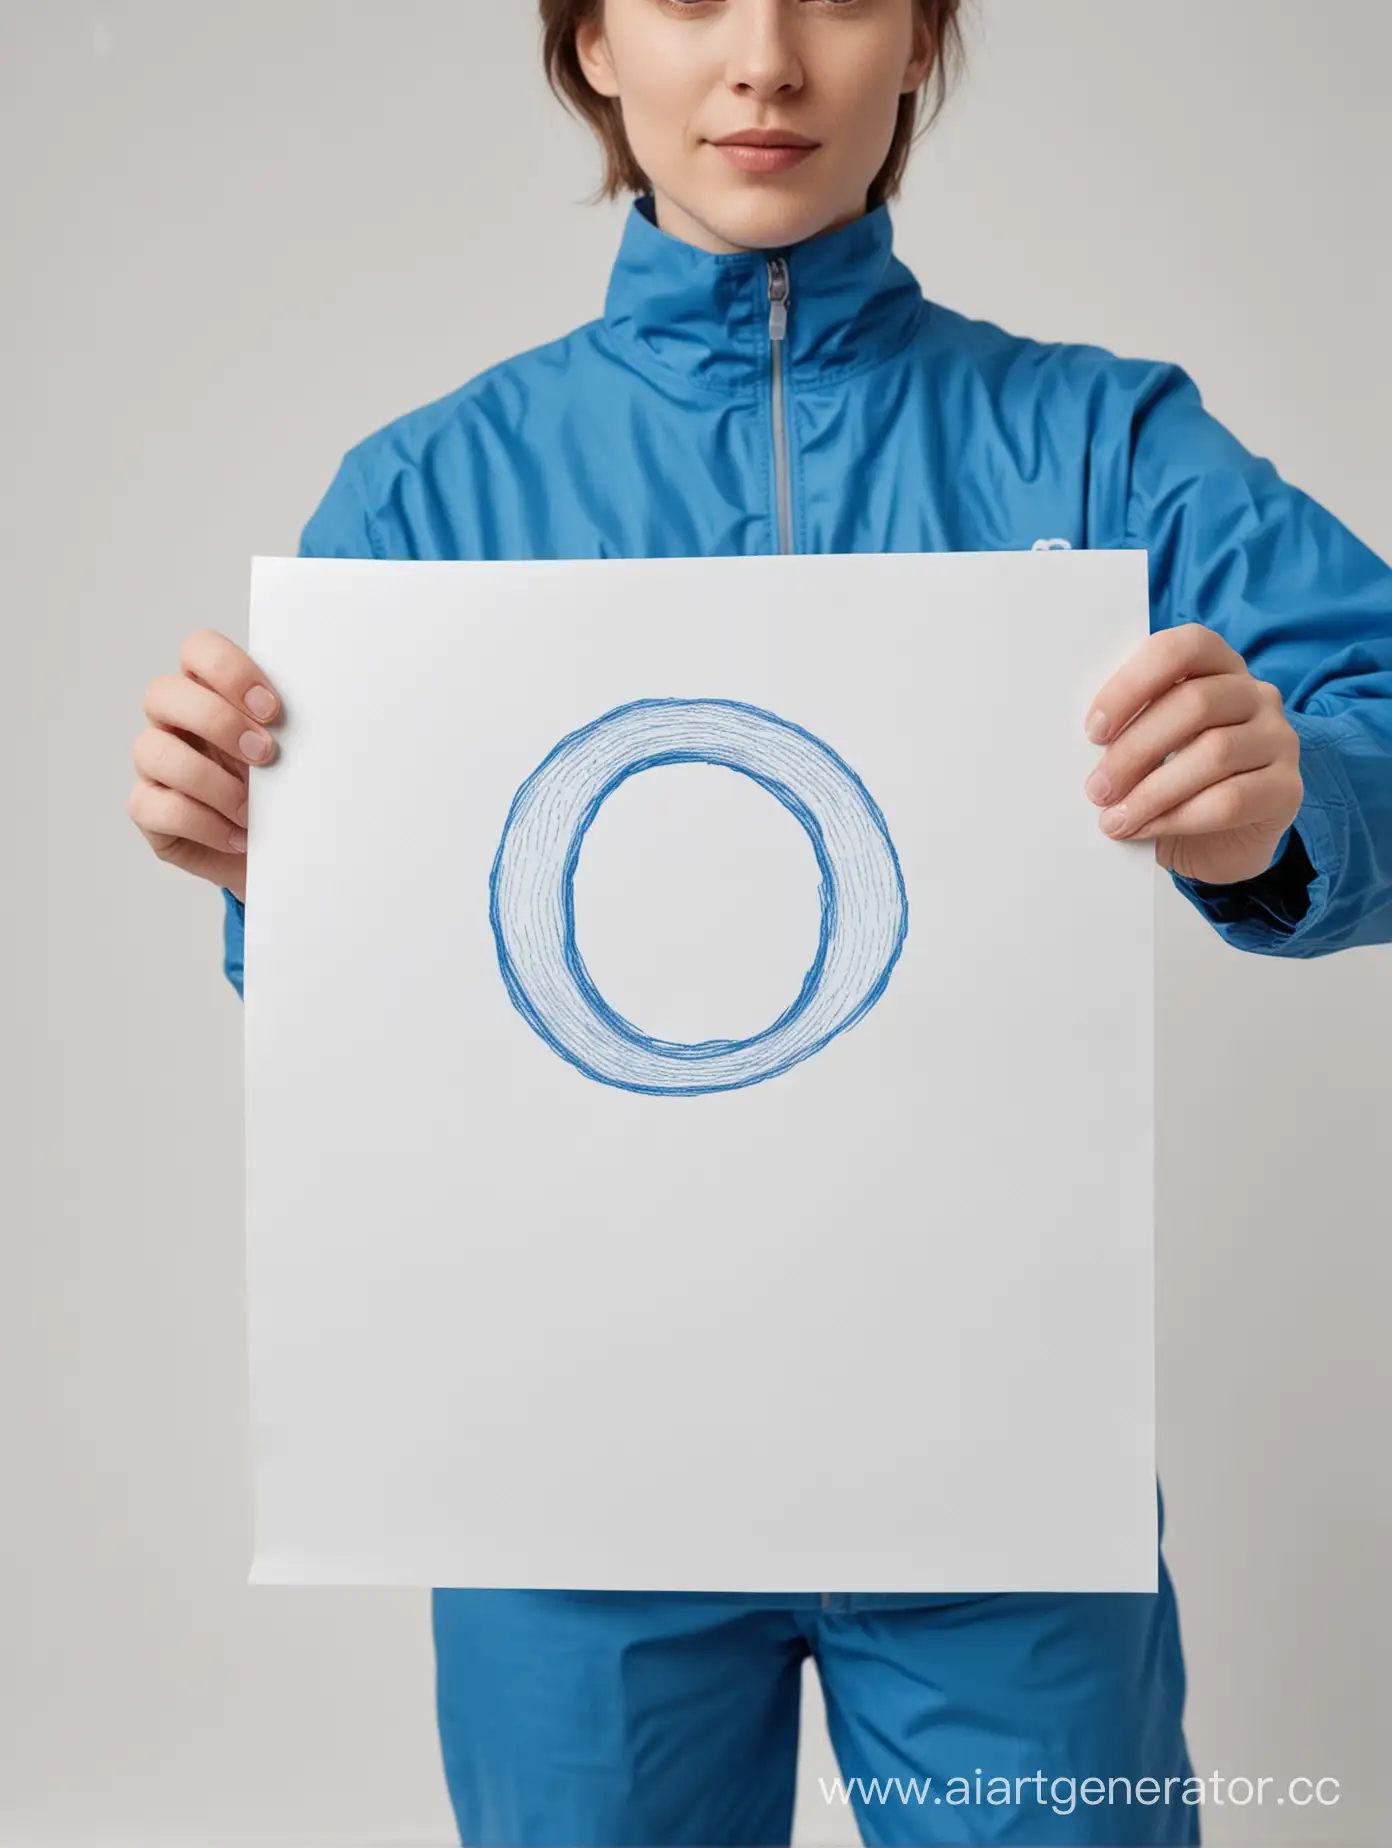 Person-in-Blue-Clothing-Displaying-Letter-O-on-White-Background